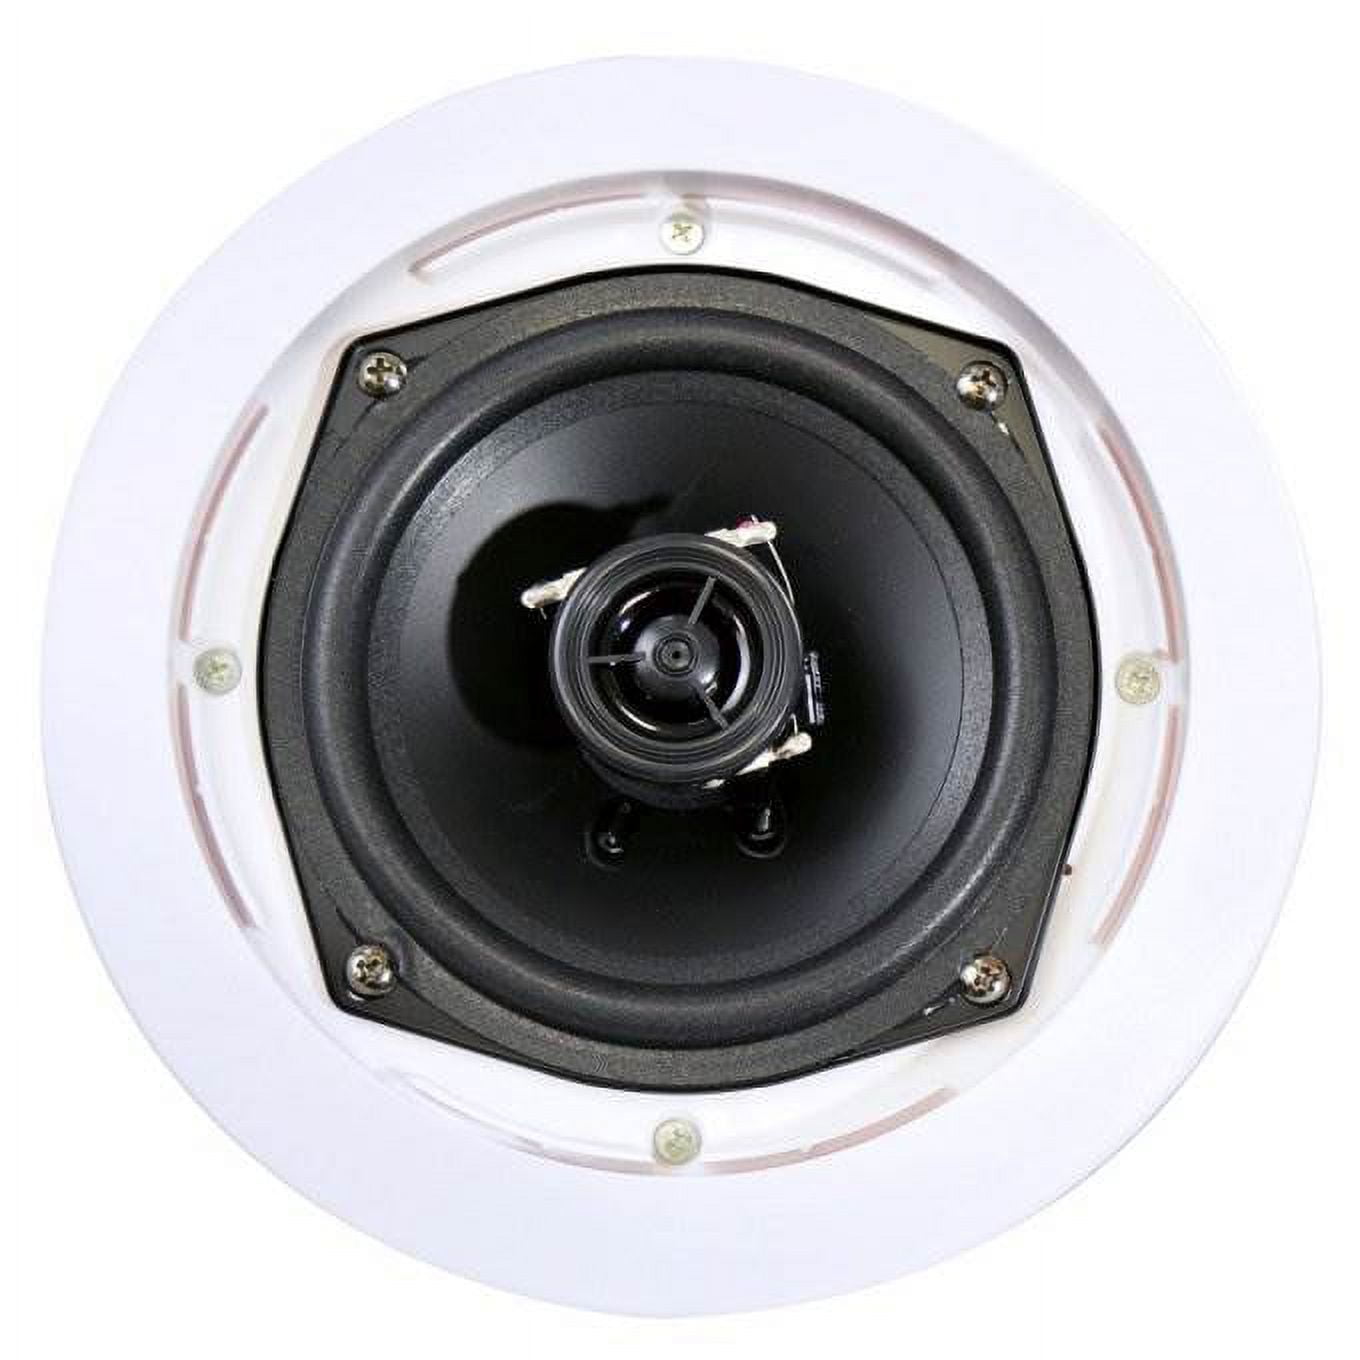 Pyle Pro PDIC61RD 6.5'' 200W 2-Way In-Ceiling/Wall Speaker System